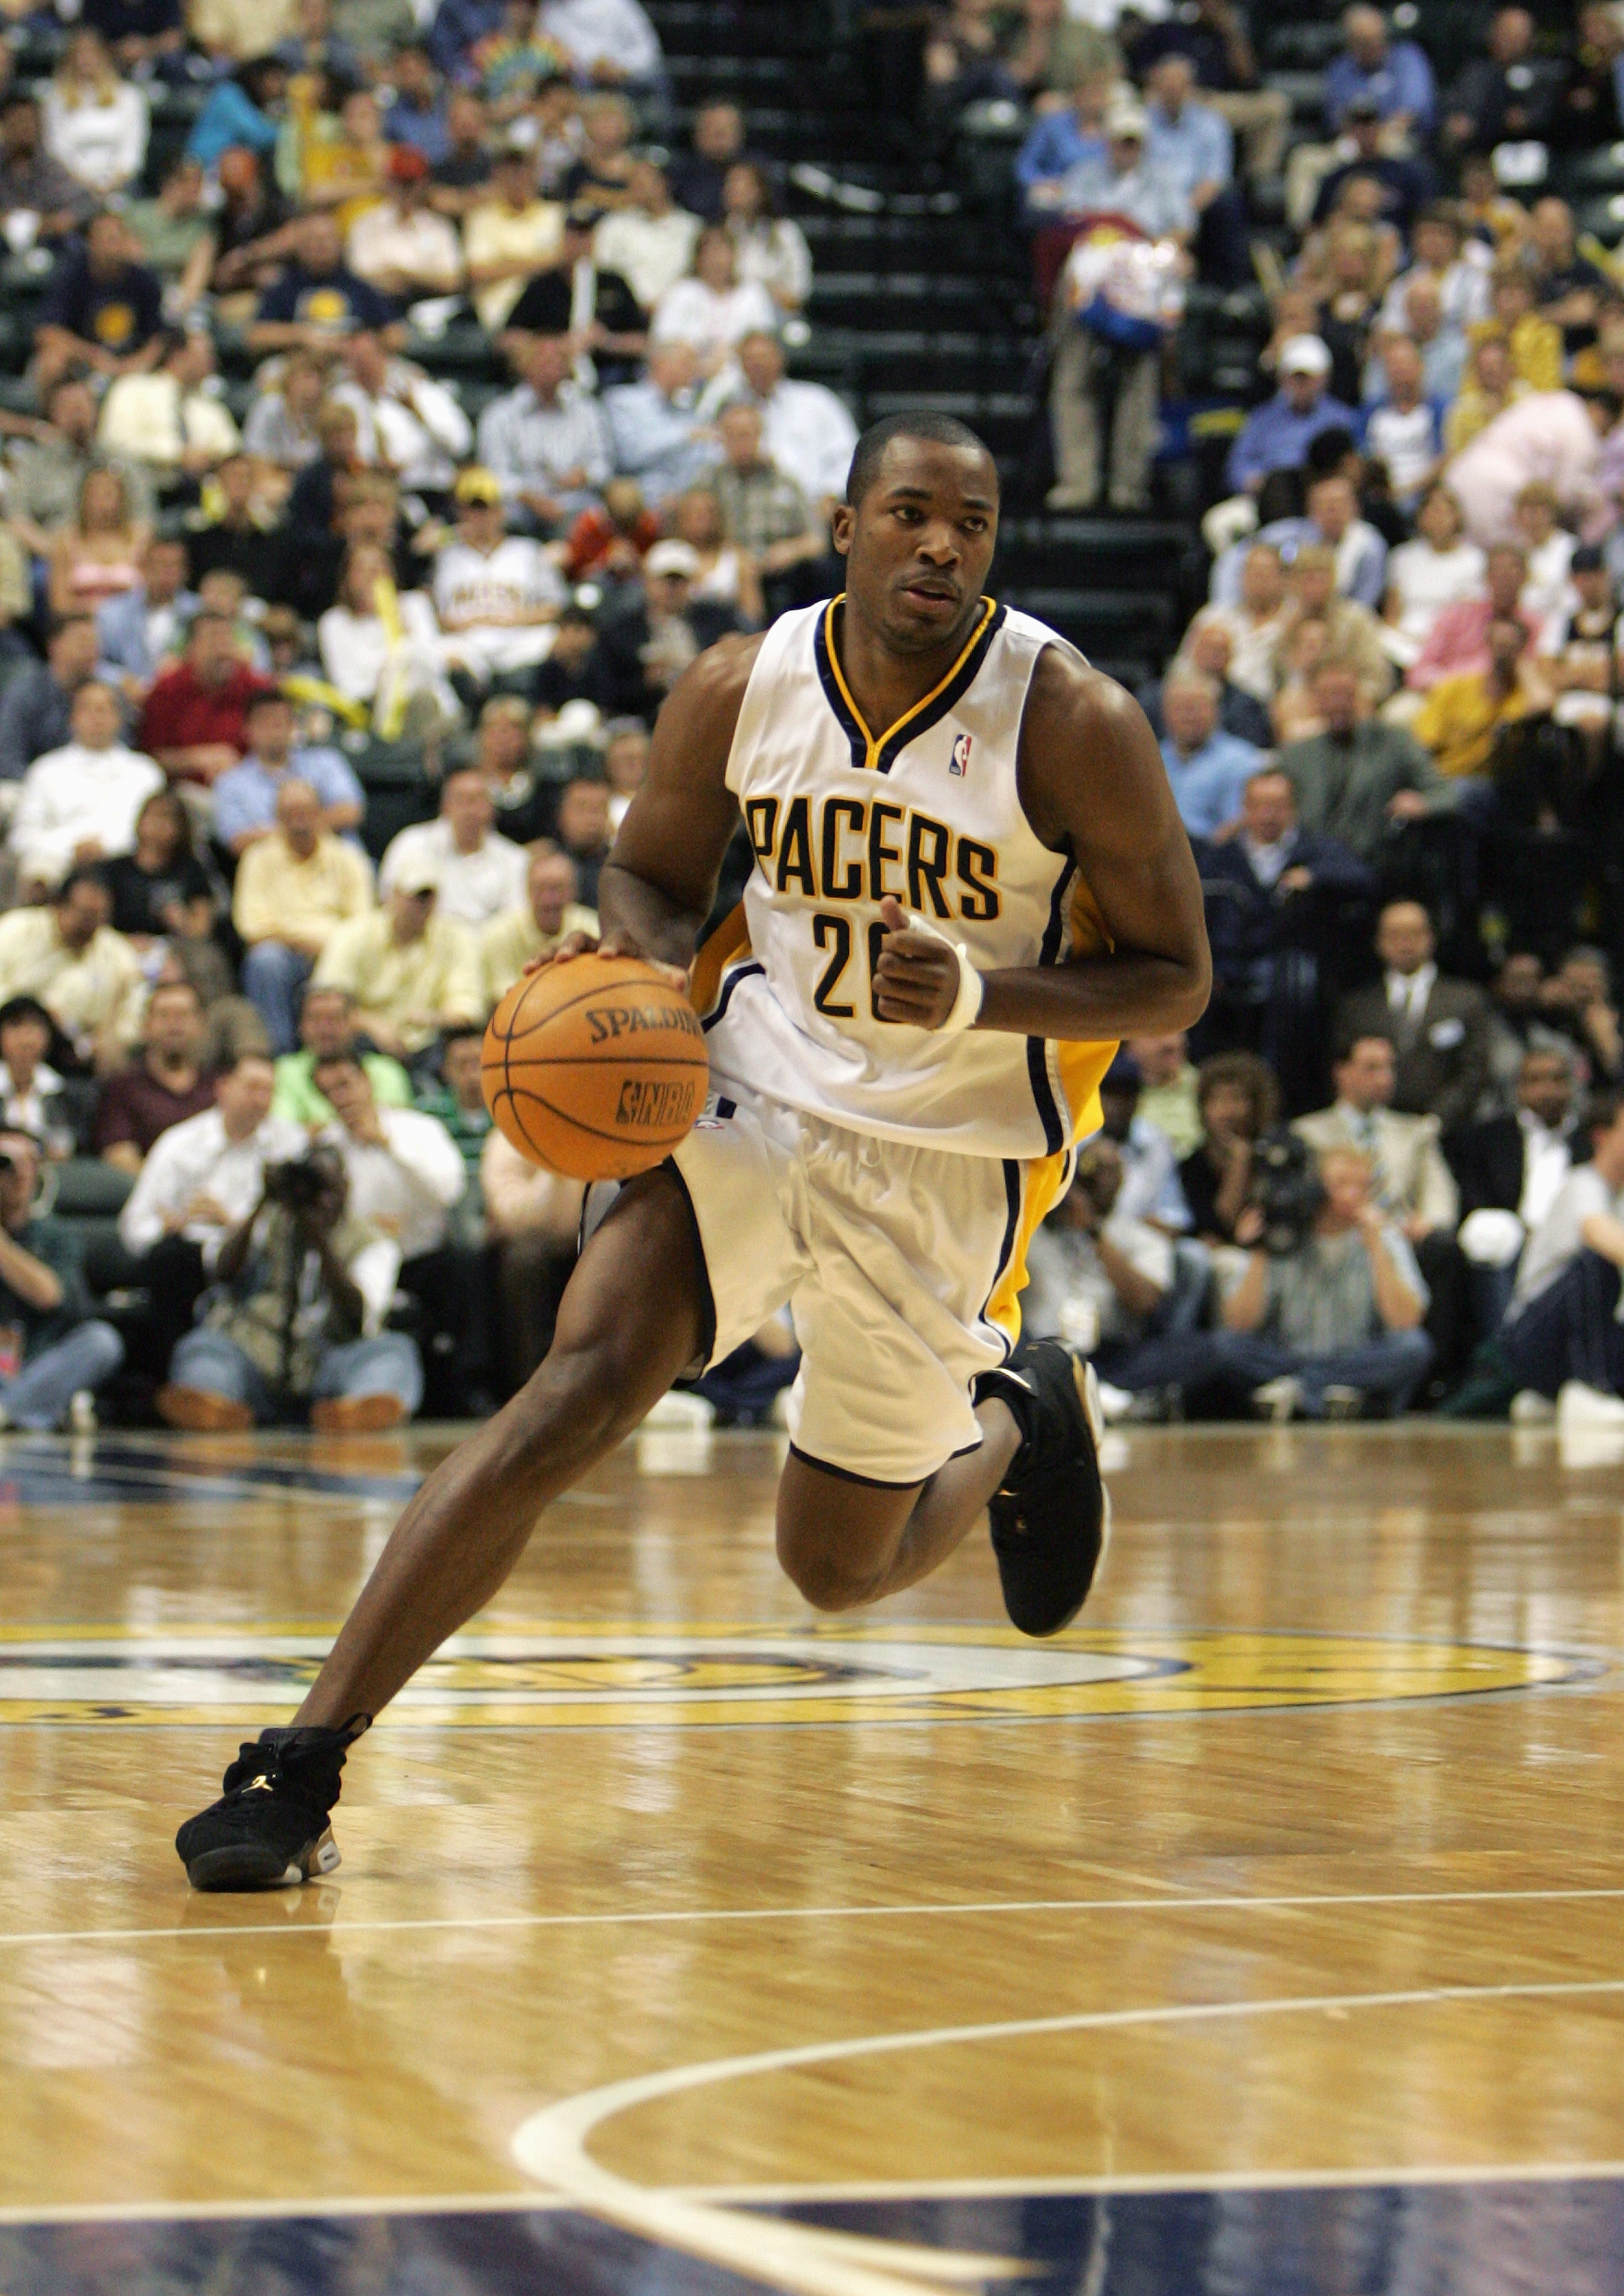 NDIANAPOLIS - MAY 04: Fred Jones #20 of the Indiana Pacers moves the ball in game six of the Eastern Conference Quarterfinals against the New Jersey Nets during the 2006 NBA Playoffs at Conseco Fieldhouse on May 4, 2006 in Indianapolis, Indiana. The Nets 